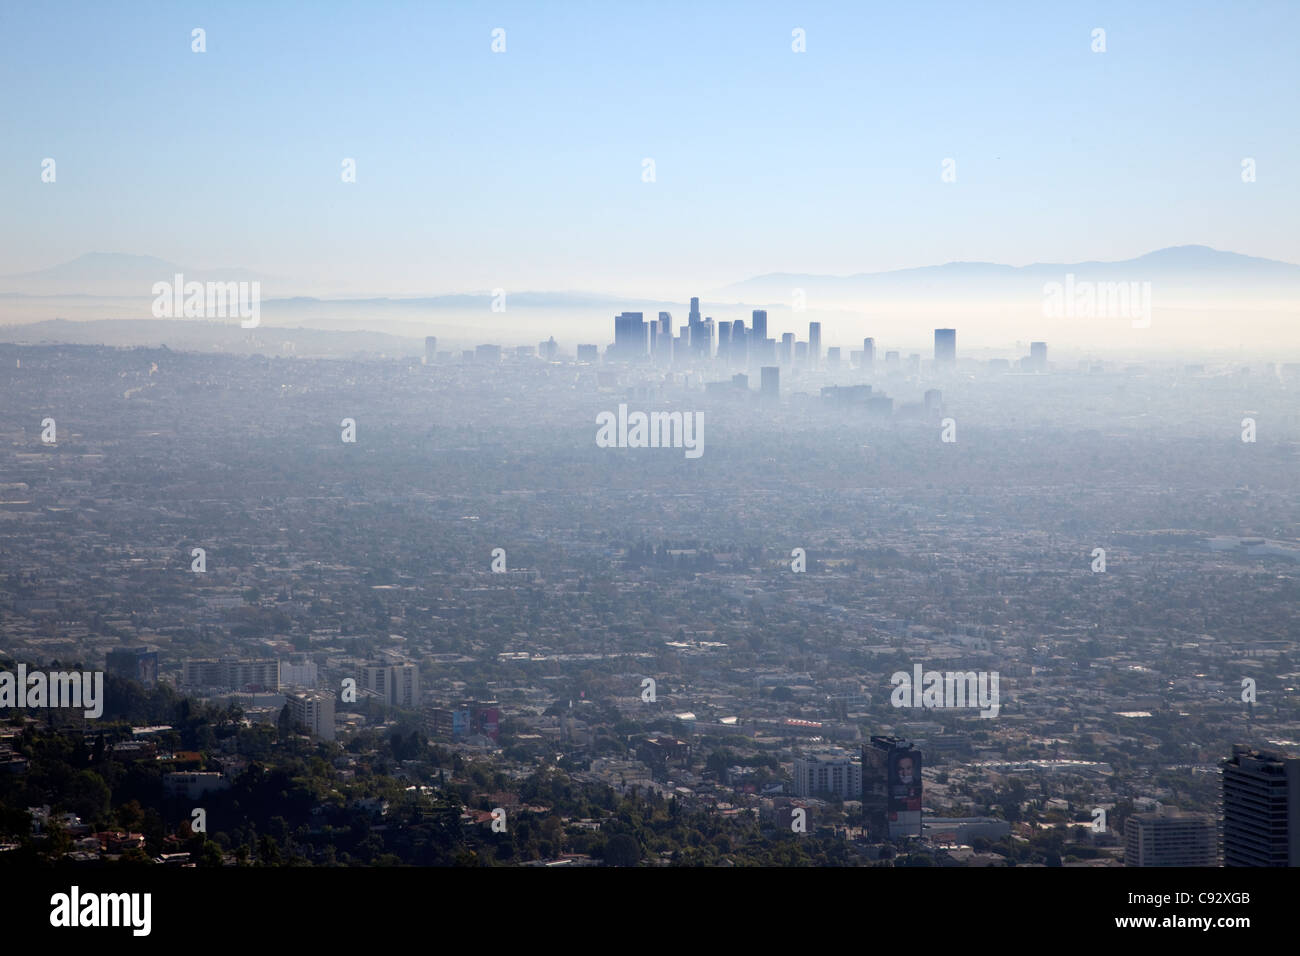 There is frequently very poor air quality over Los Angeles city with a haze or pollution cloud covering the area. Stock Photo